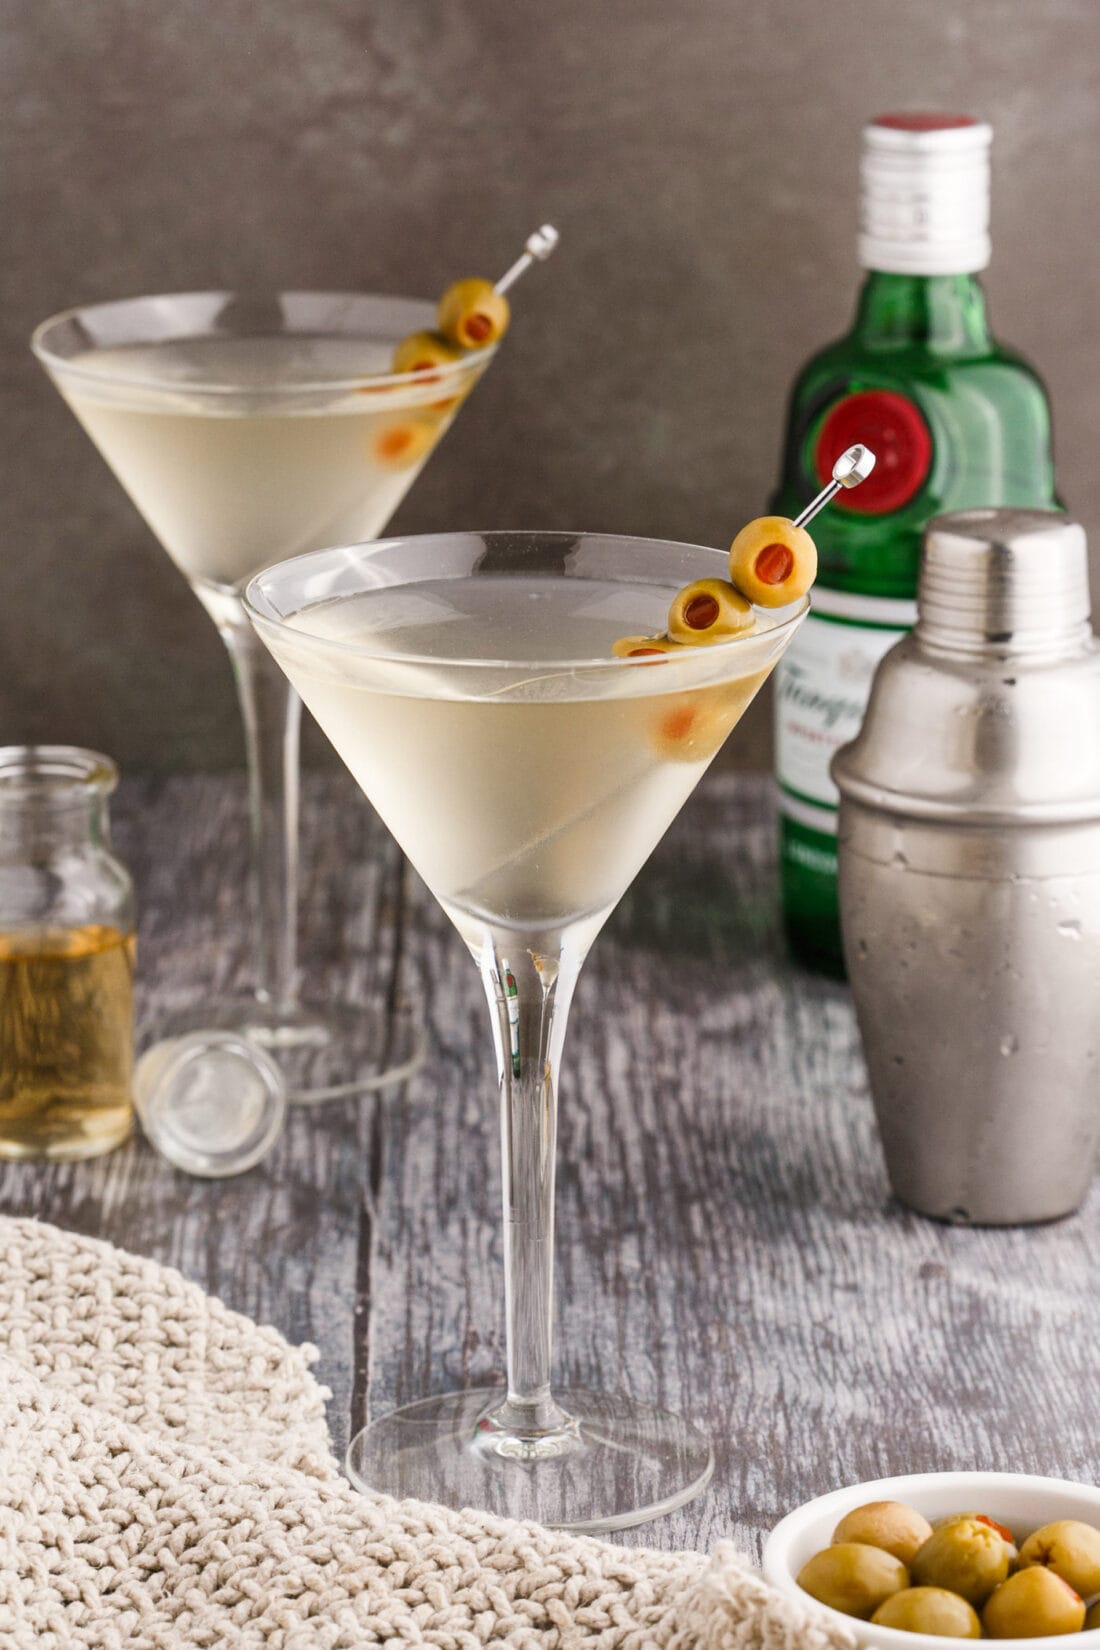 Dirty Martini with liquor bottles